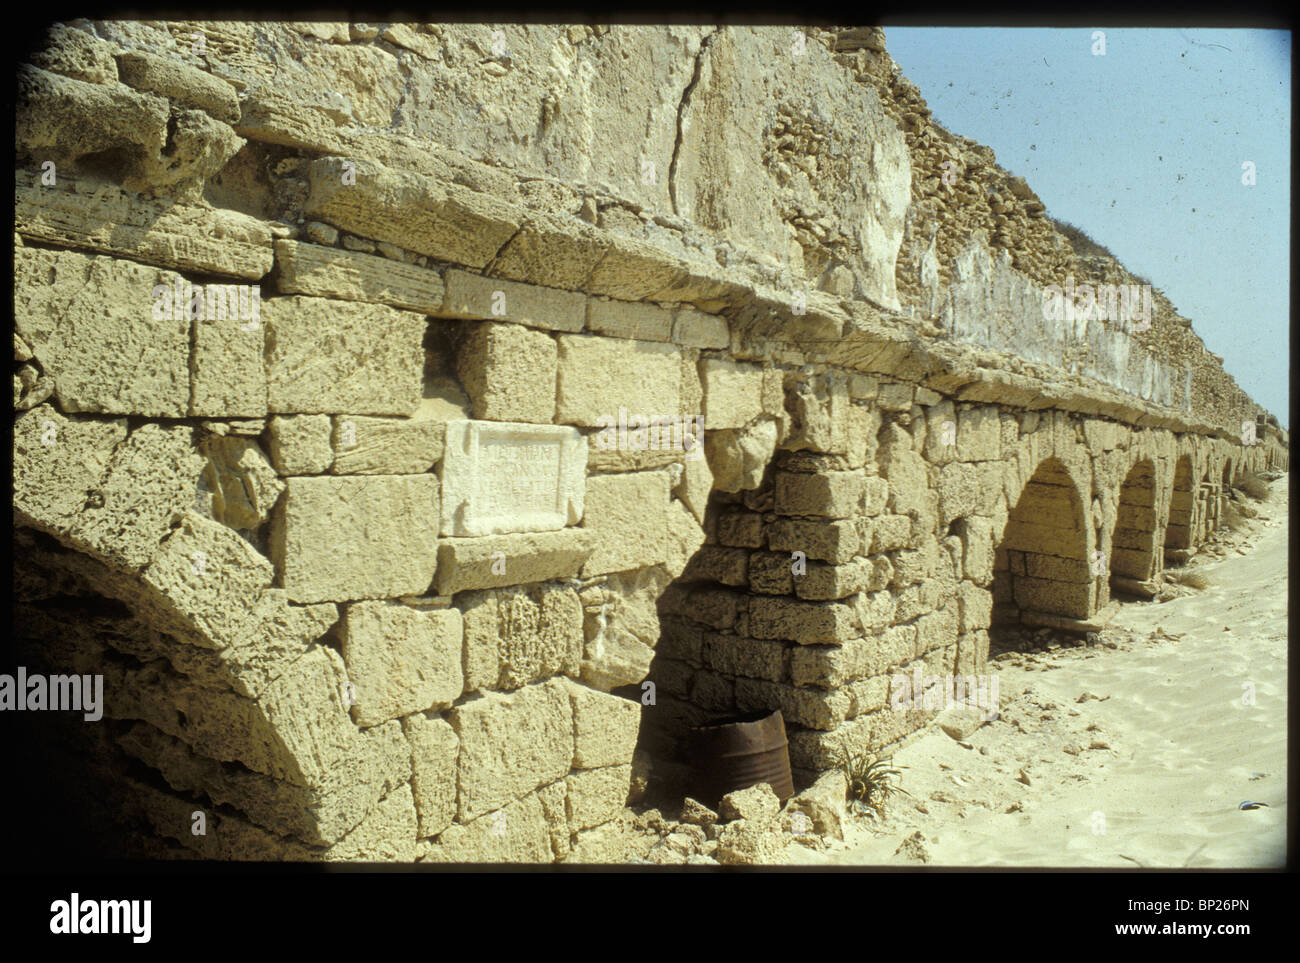 1239. CAESAREA, THE AQUADUCT BUILT BY THE ROMANS WHICH SUPPLIED THE PORT CITY WITH FRESH WATER FROM THE HILLS Stock Photo